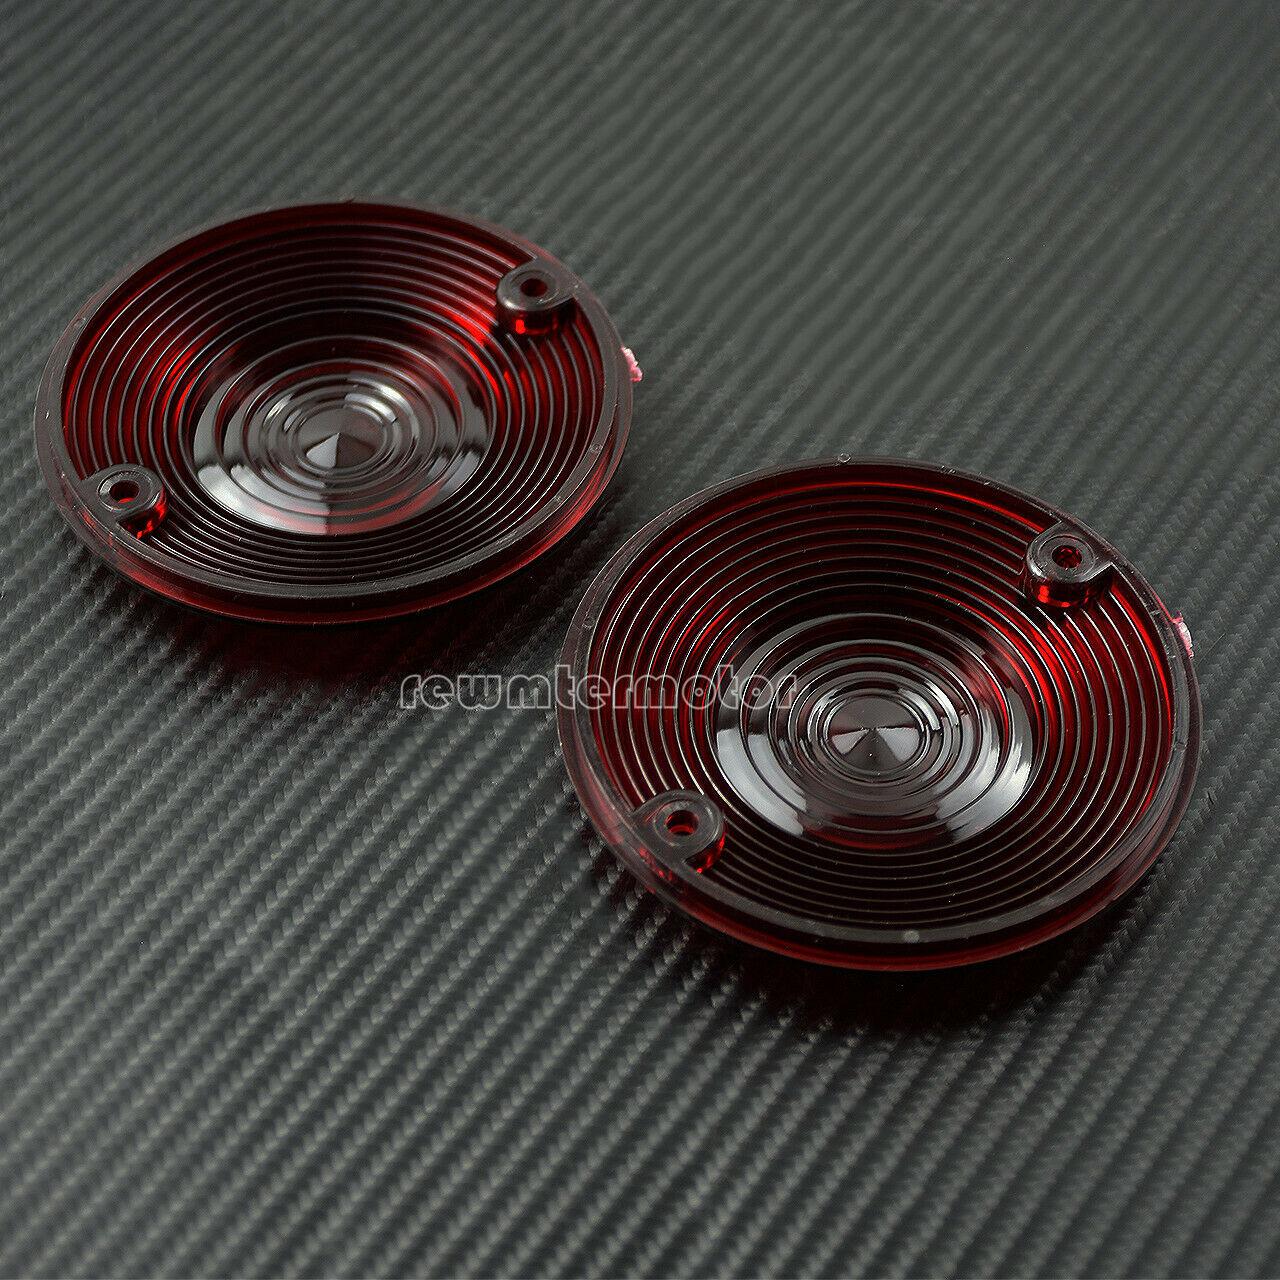 1 Pair Flat Turn Signal Lens Red Cover Fit For Harley Touring FLHT FLTR Softail - Moto Life Products